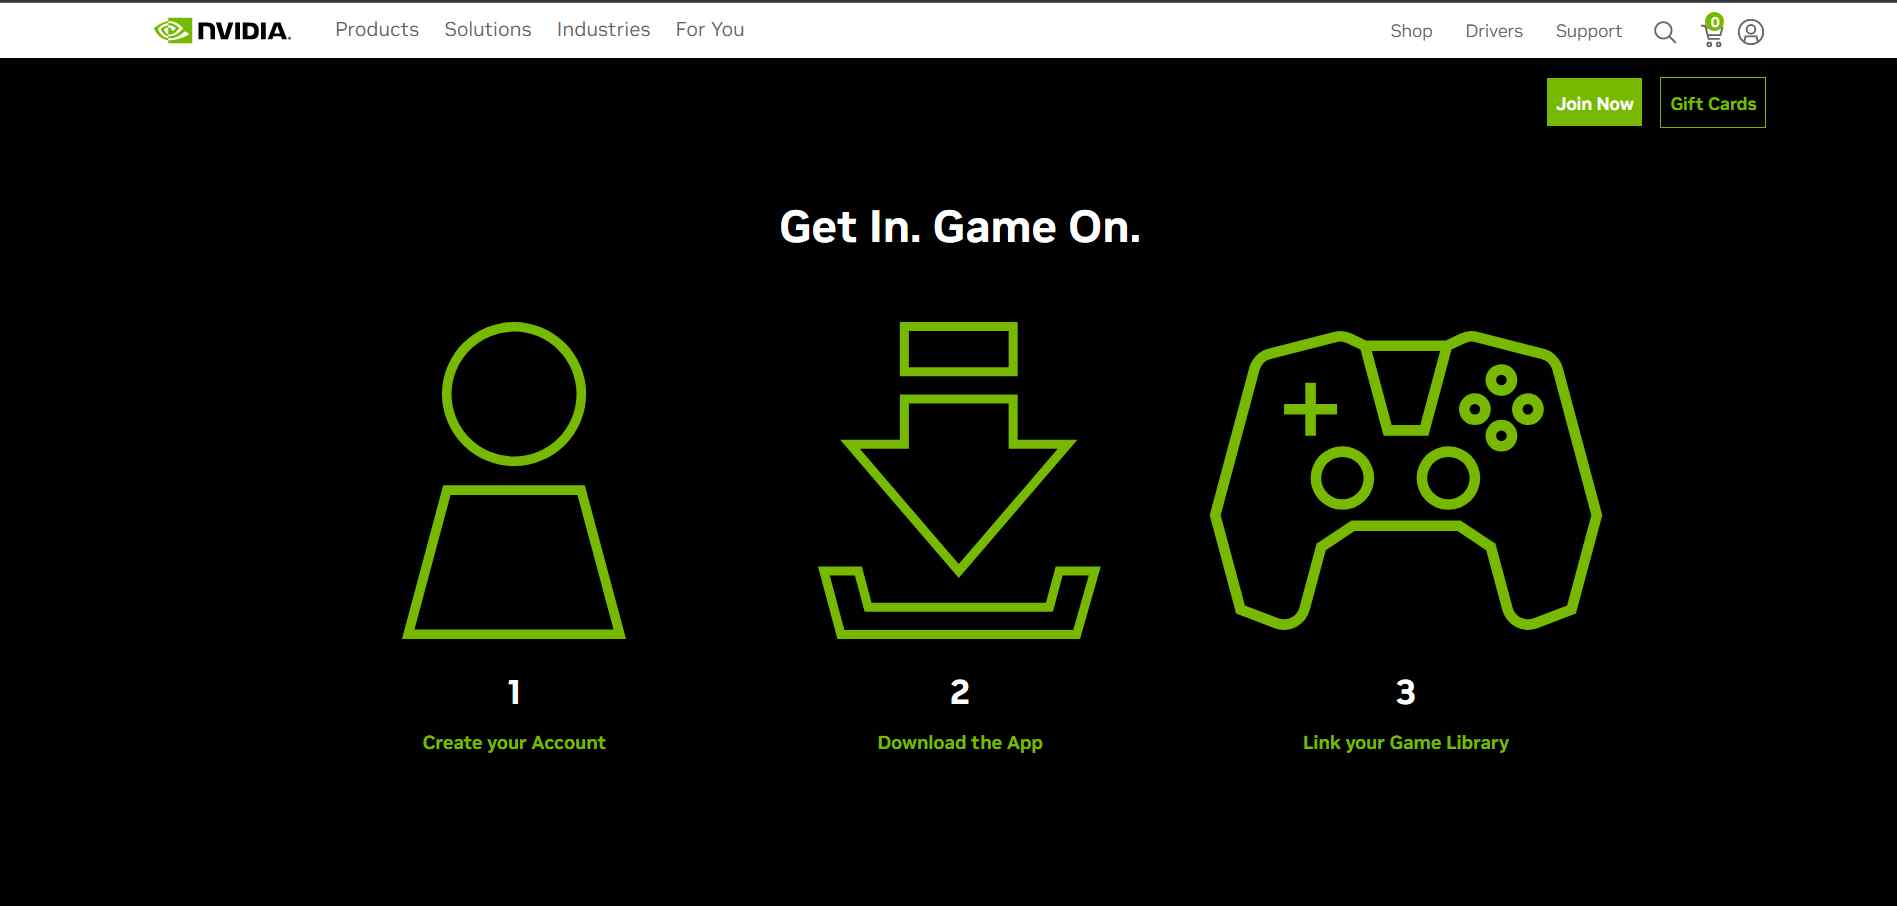 GeForce Now Options for Video Game Rental